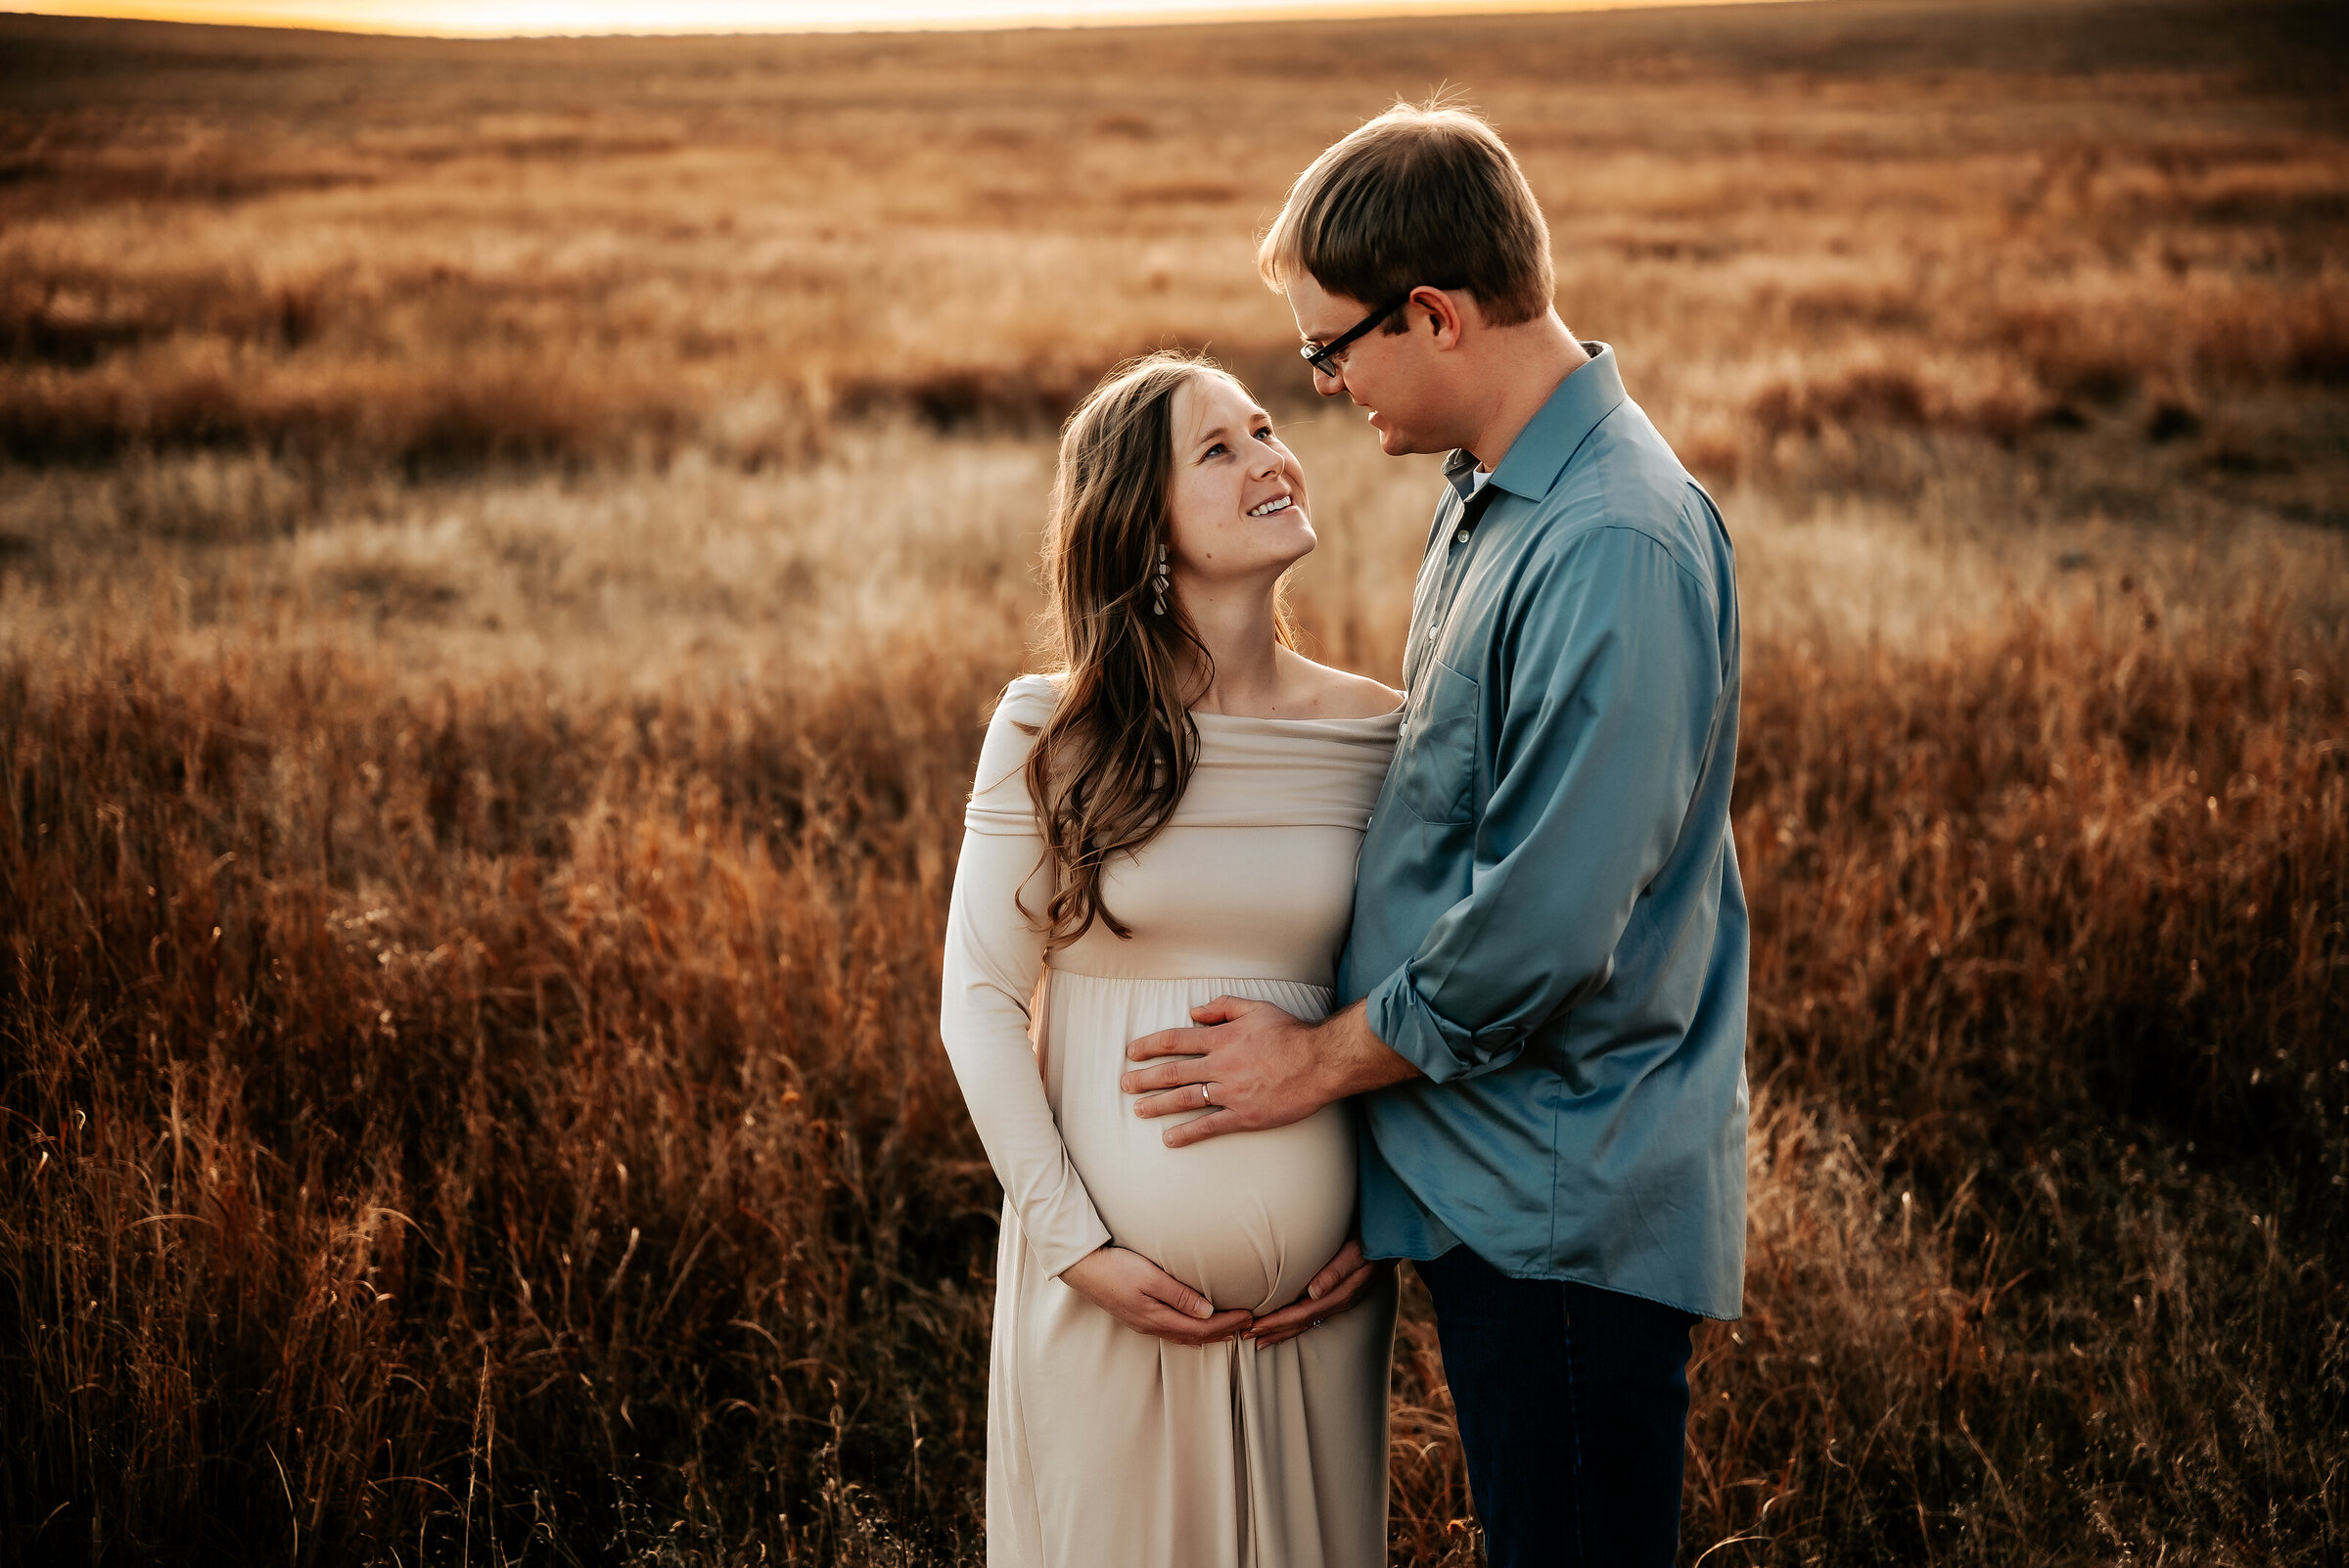 Man touches woman's pregnant belly for maternity photos in Nebraska